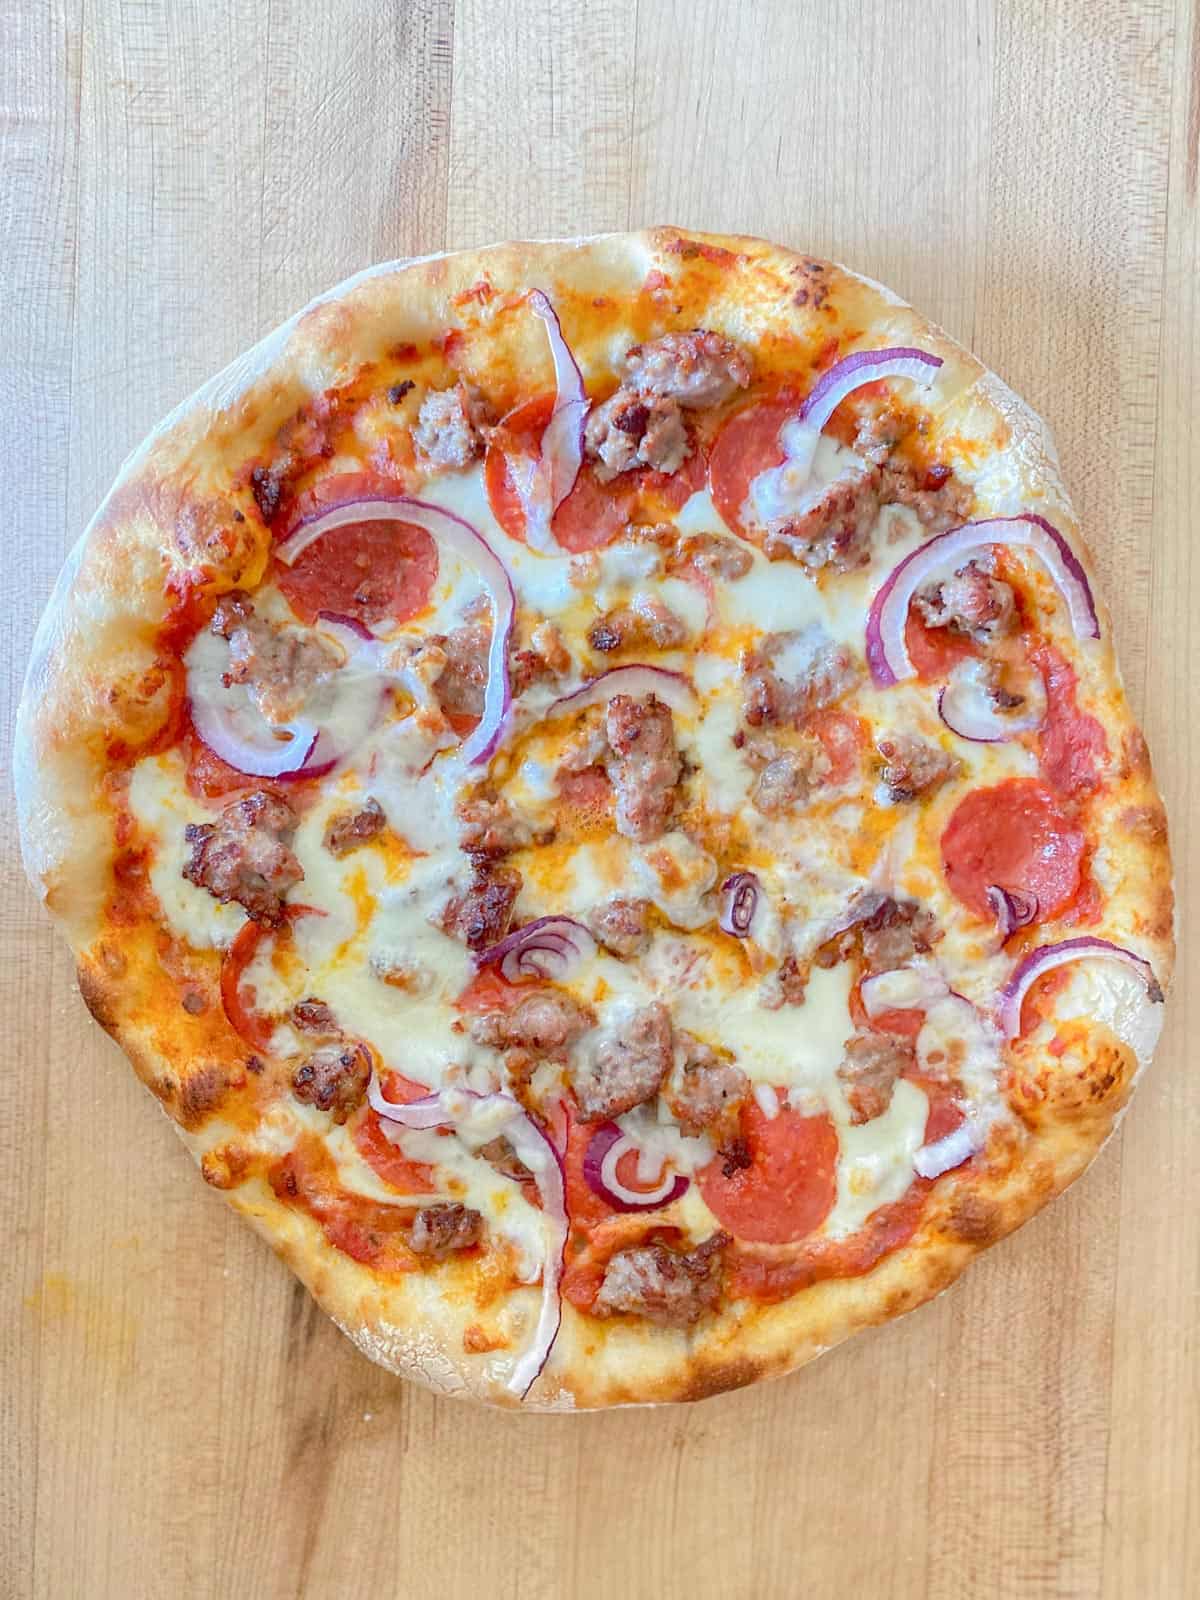 sausage and pepperoni pizza with onions made on homemade pizza dough